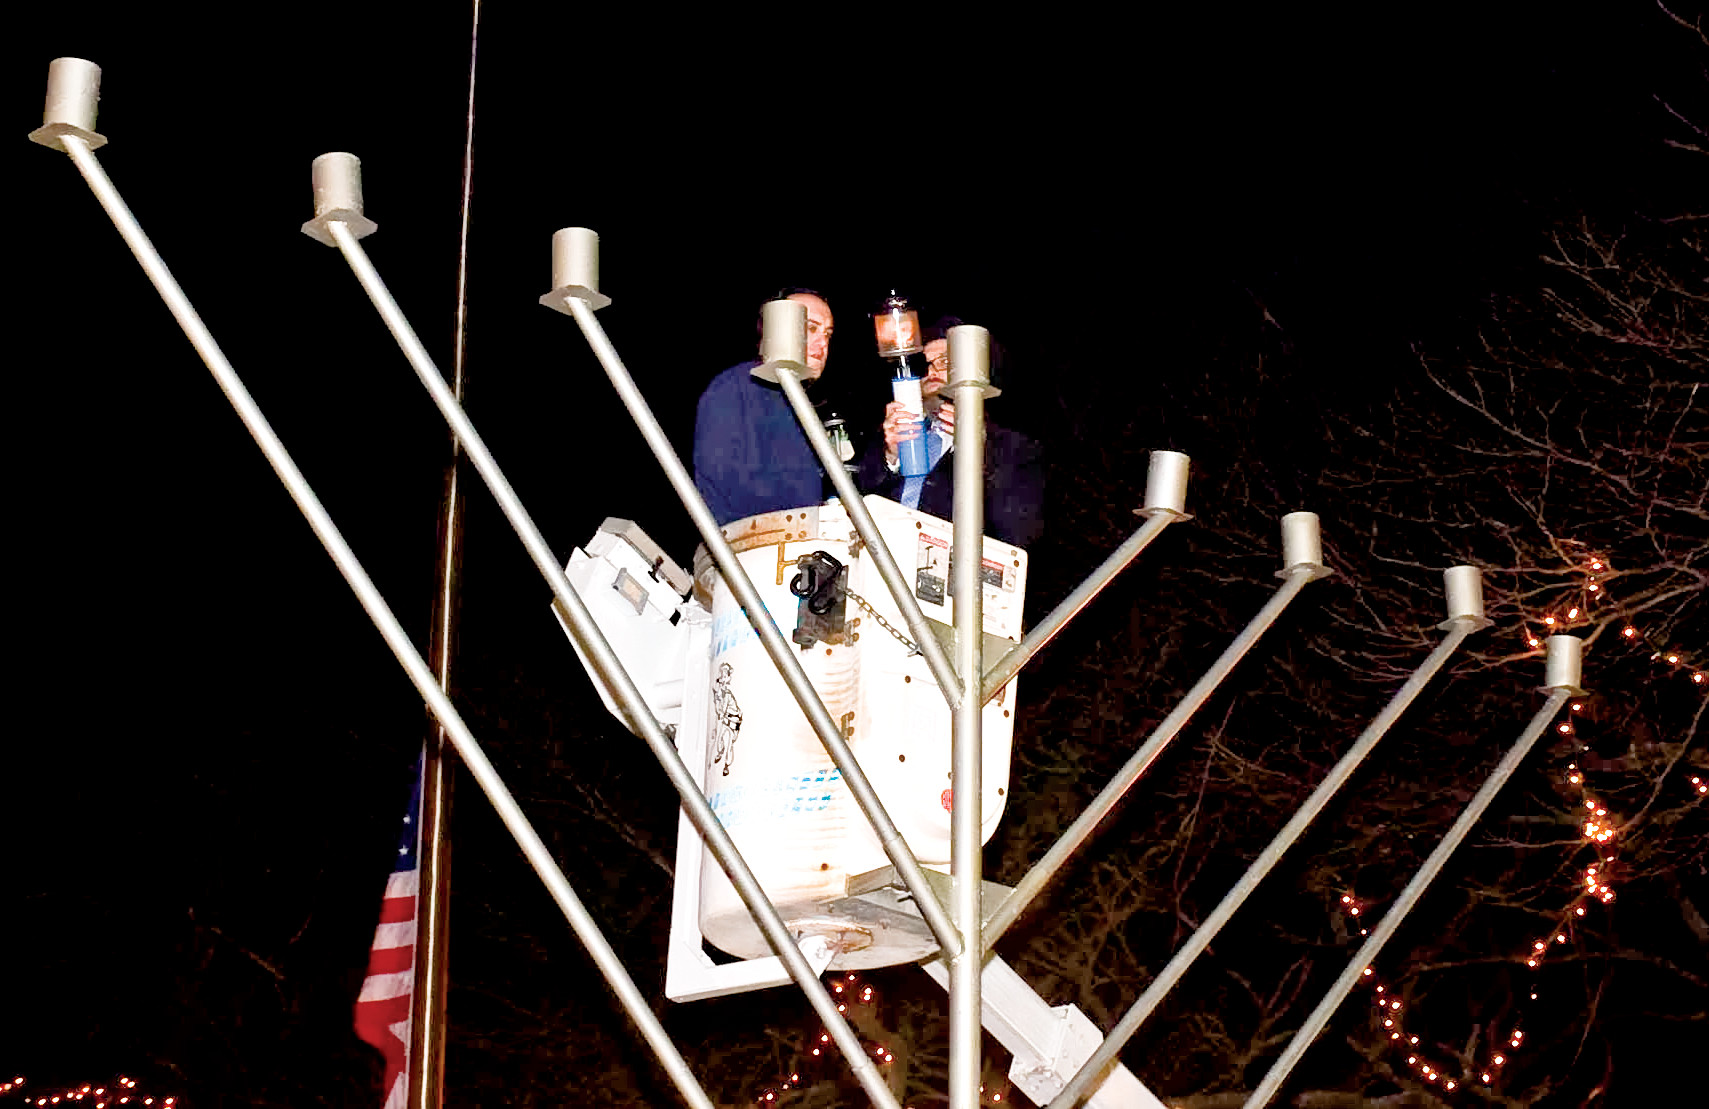 Councilman Scott Mandell, left, lit the first candle of the menorah.